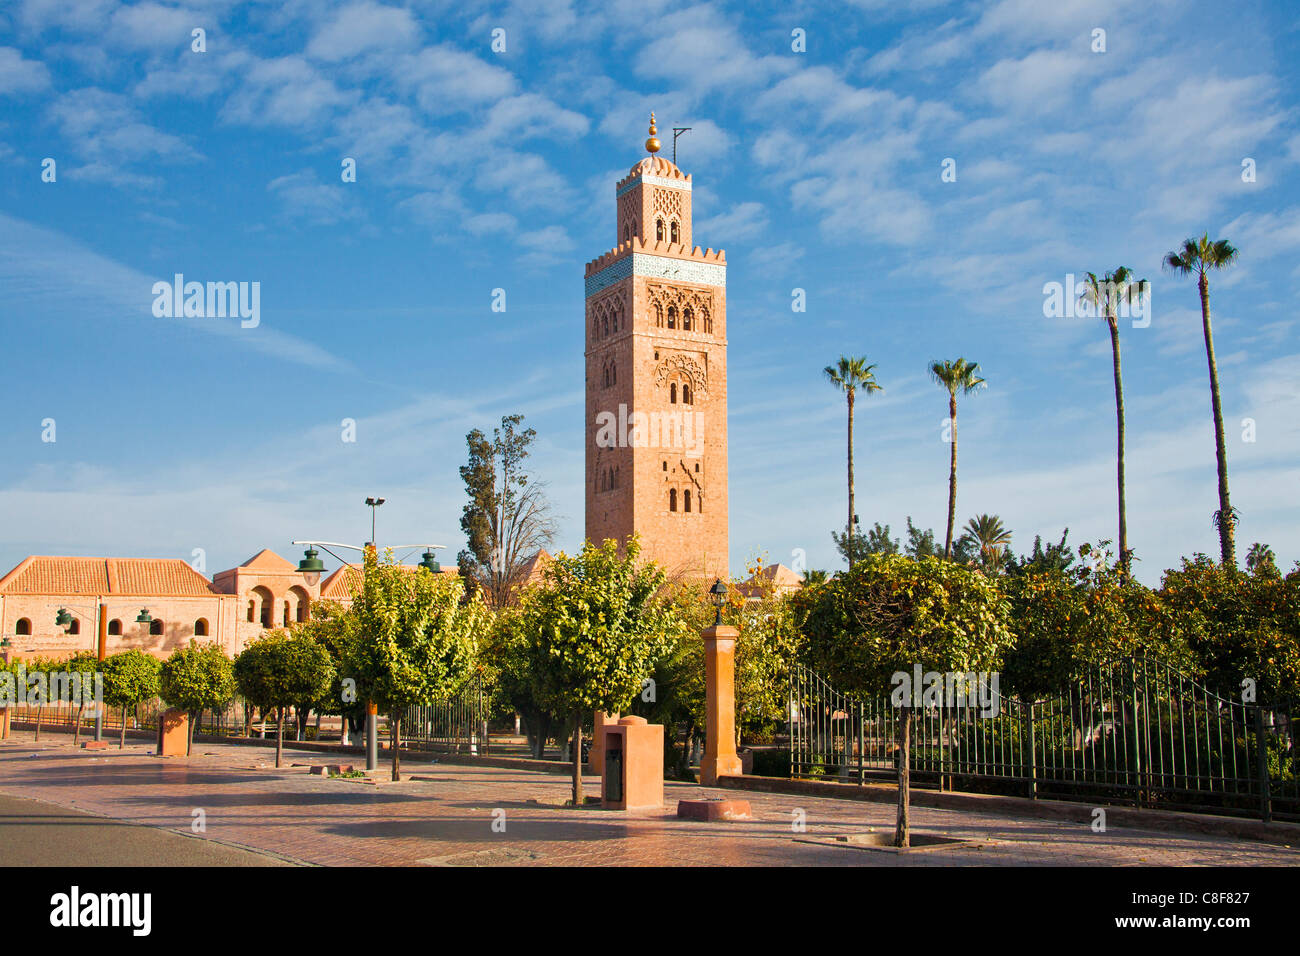 Il Marocco, Africa Settentrionale, Africa Marrakech Koutoubia, la Moschea Koutoubia, tower, rook, Foto Stock